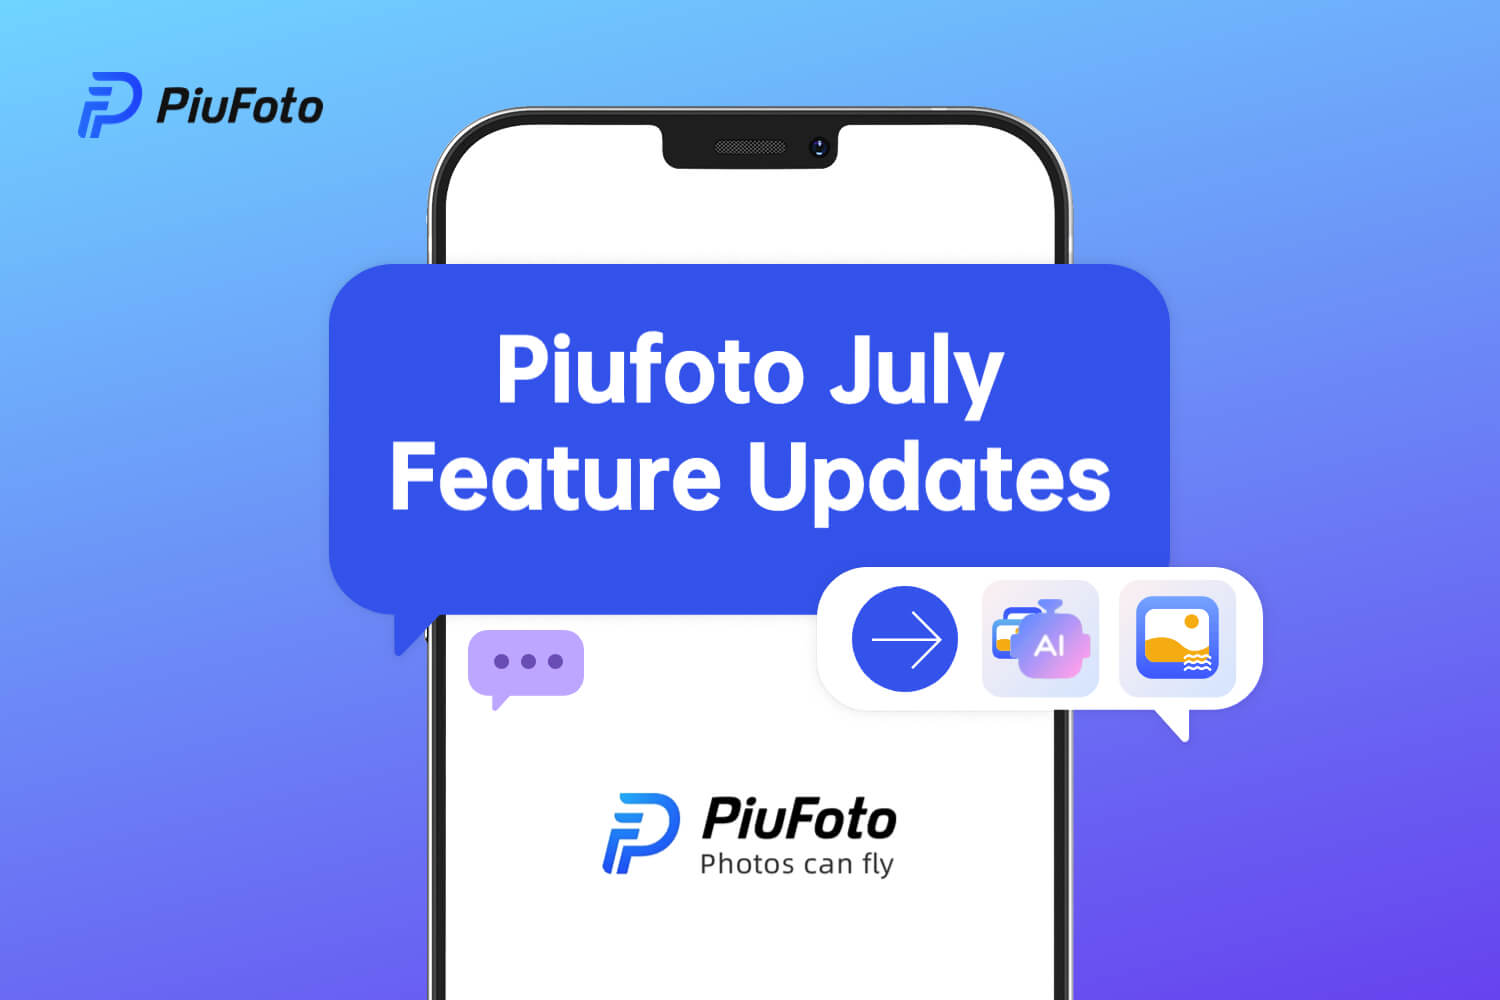 Piufoto July Feature Updates: Piufoto 2.0's Significant Upgrade